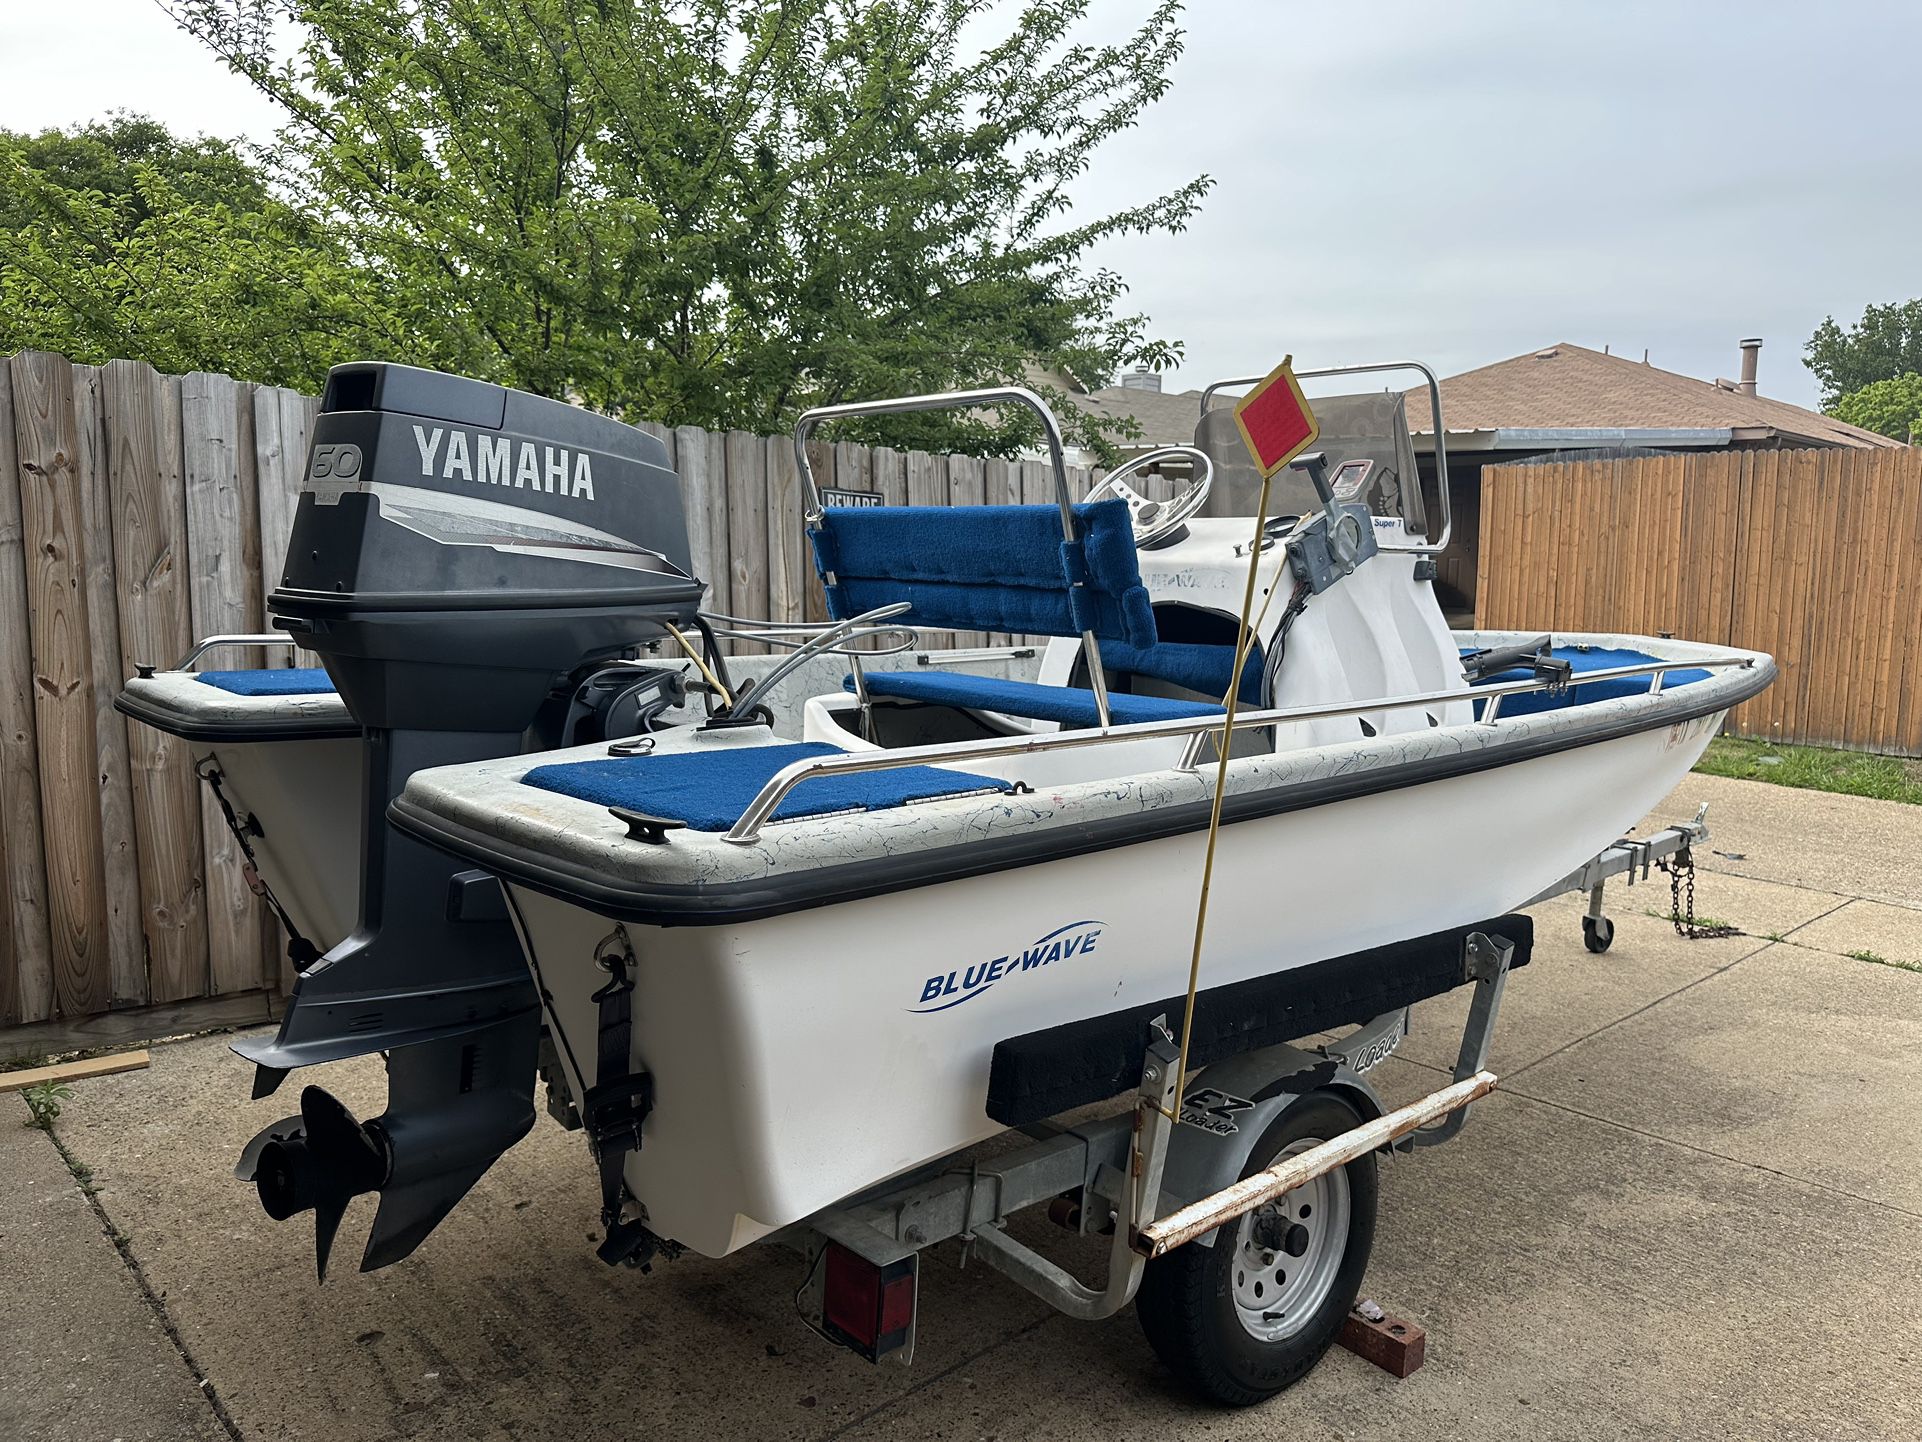  1996 Blue wave center console Boat 165  Powered by 60 horse Yamaha  E z load trailer Motor runs very strong  